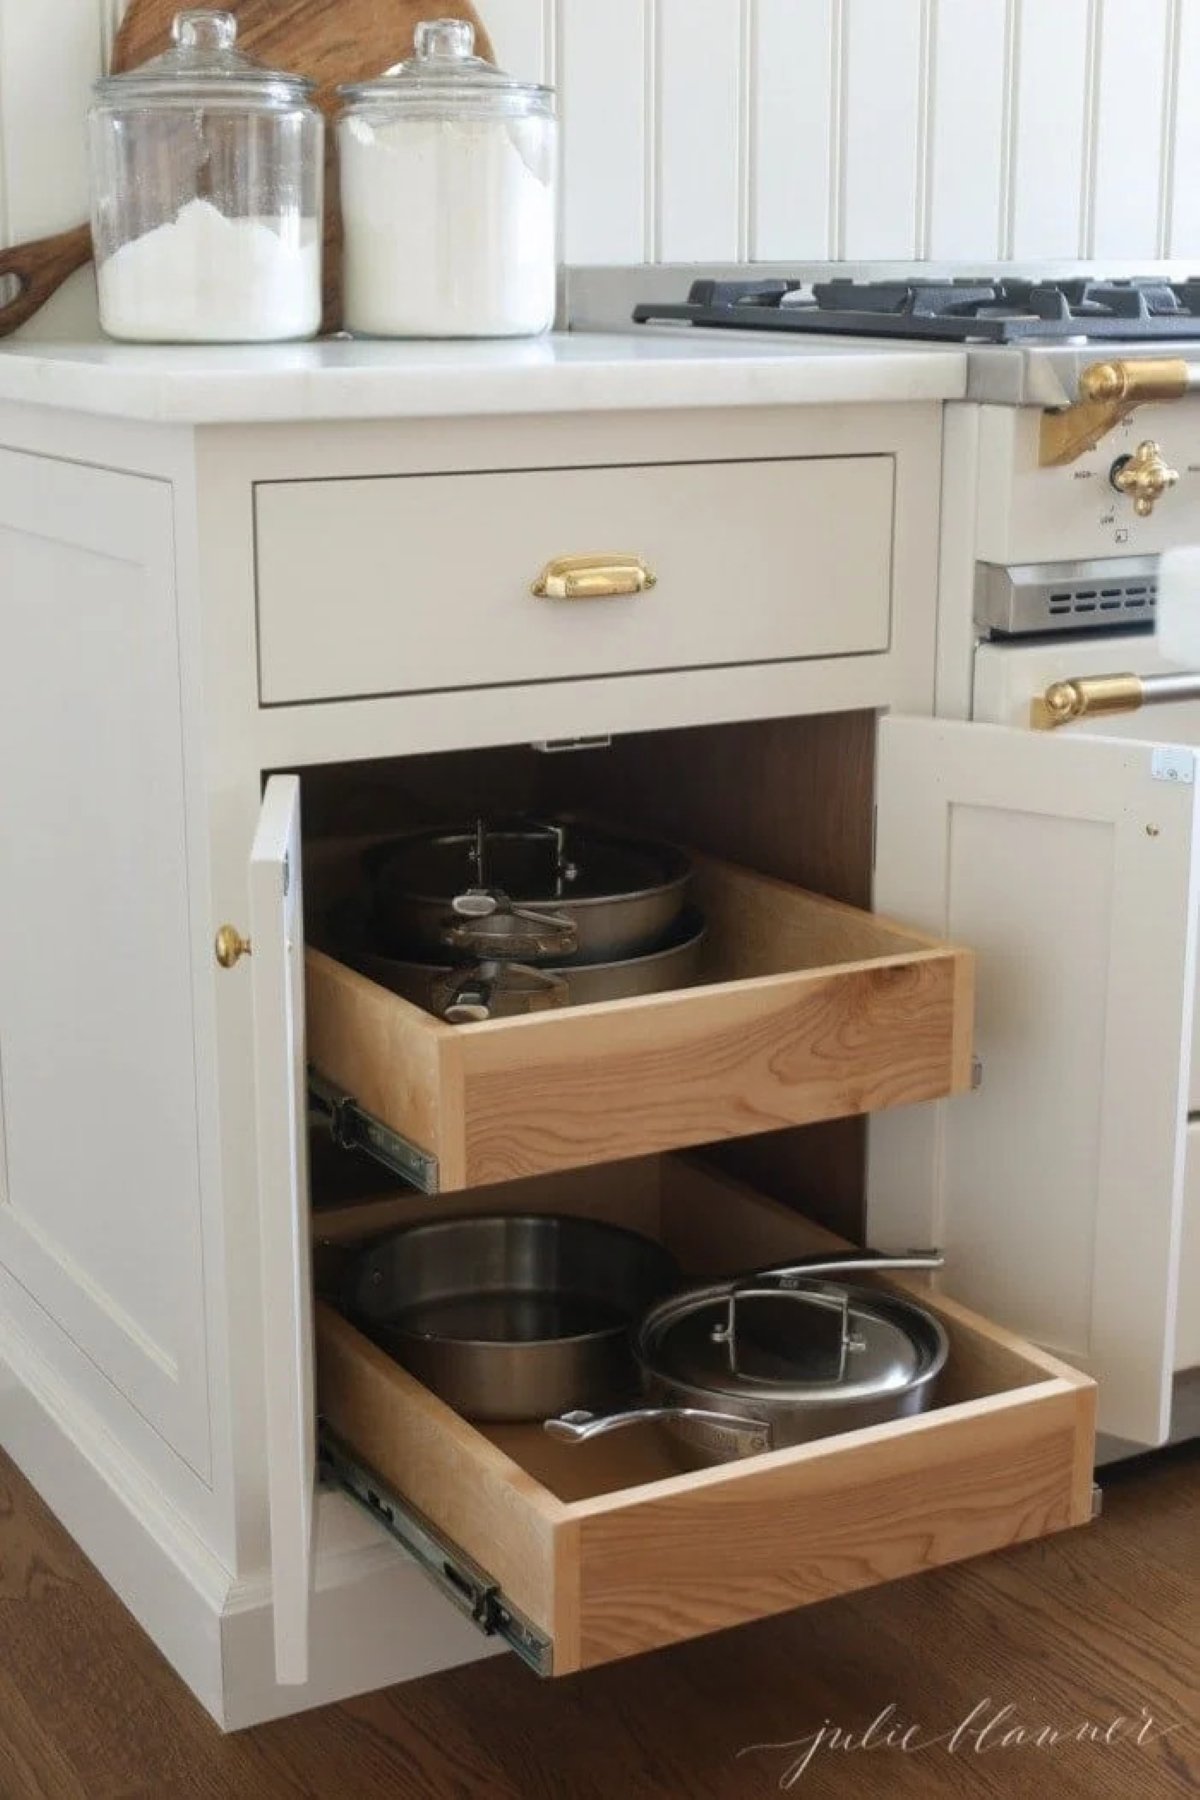 Pull out drawers for pots and pans storage in a kitchen cabinet by a French range.